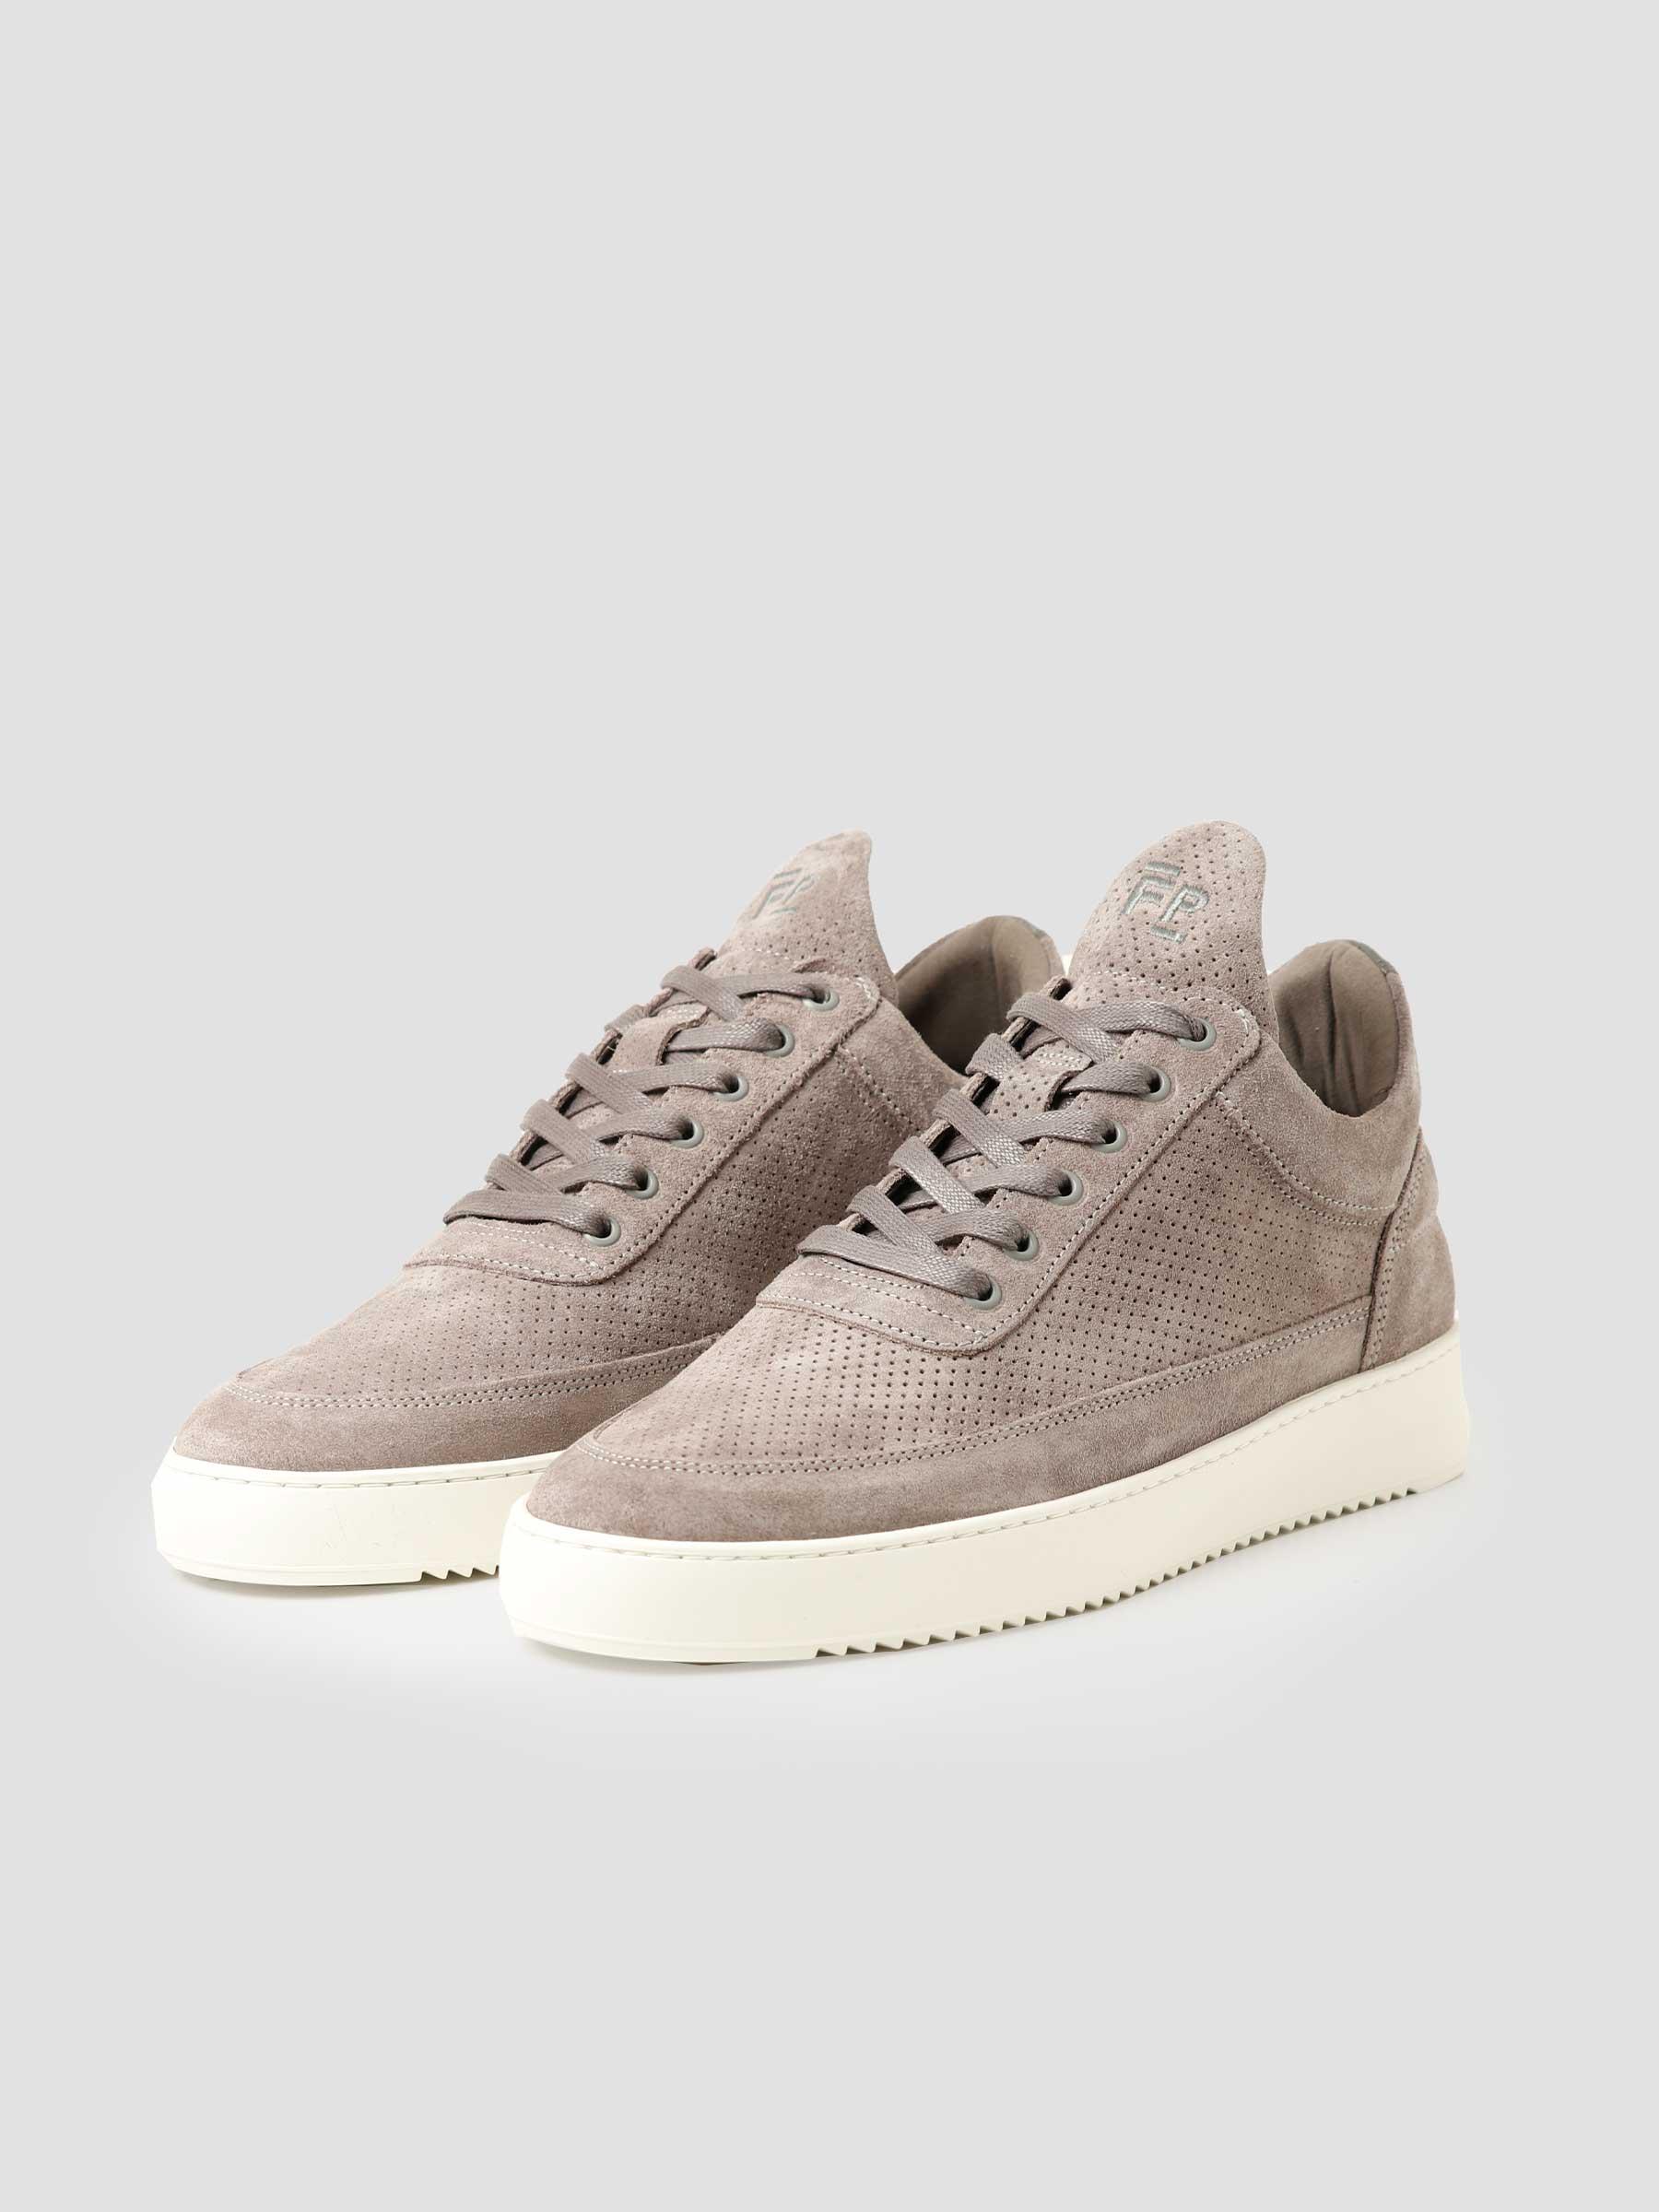 Low Top Perforated Grey 101201010020